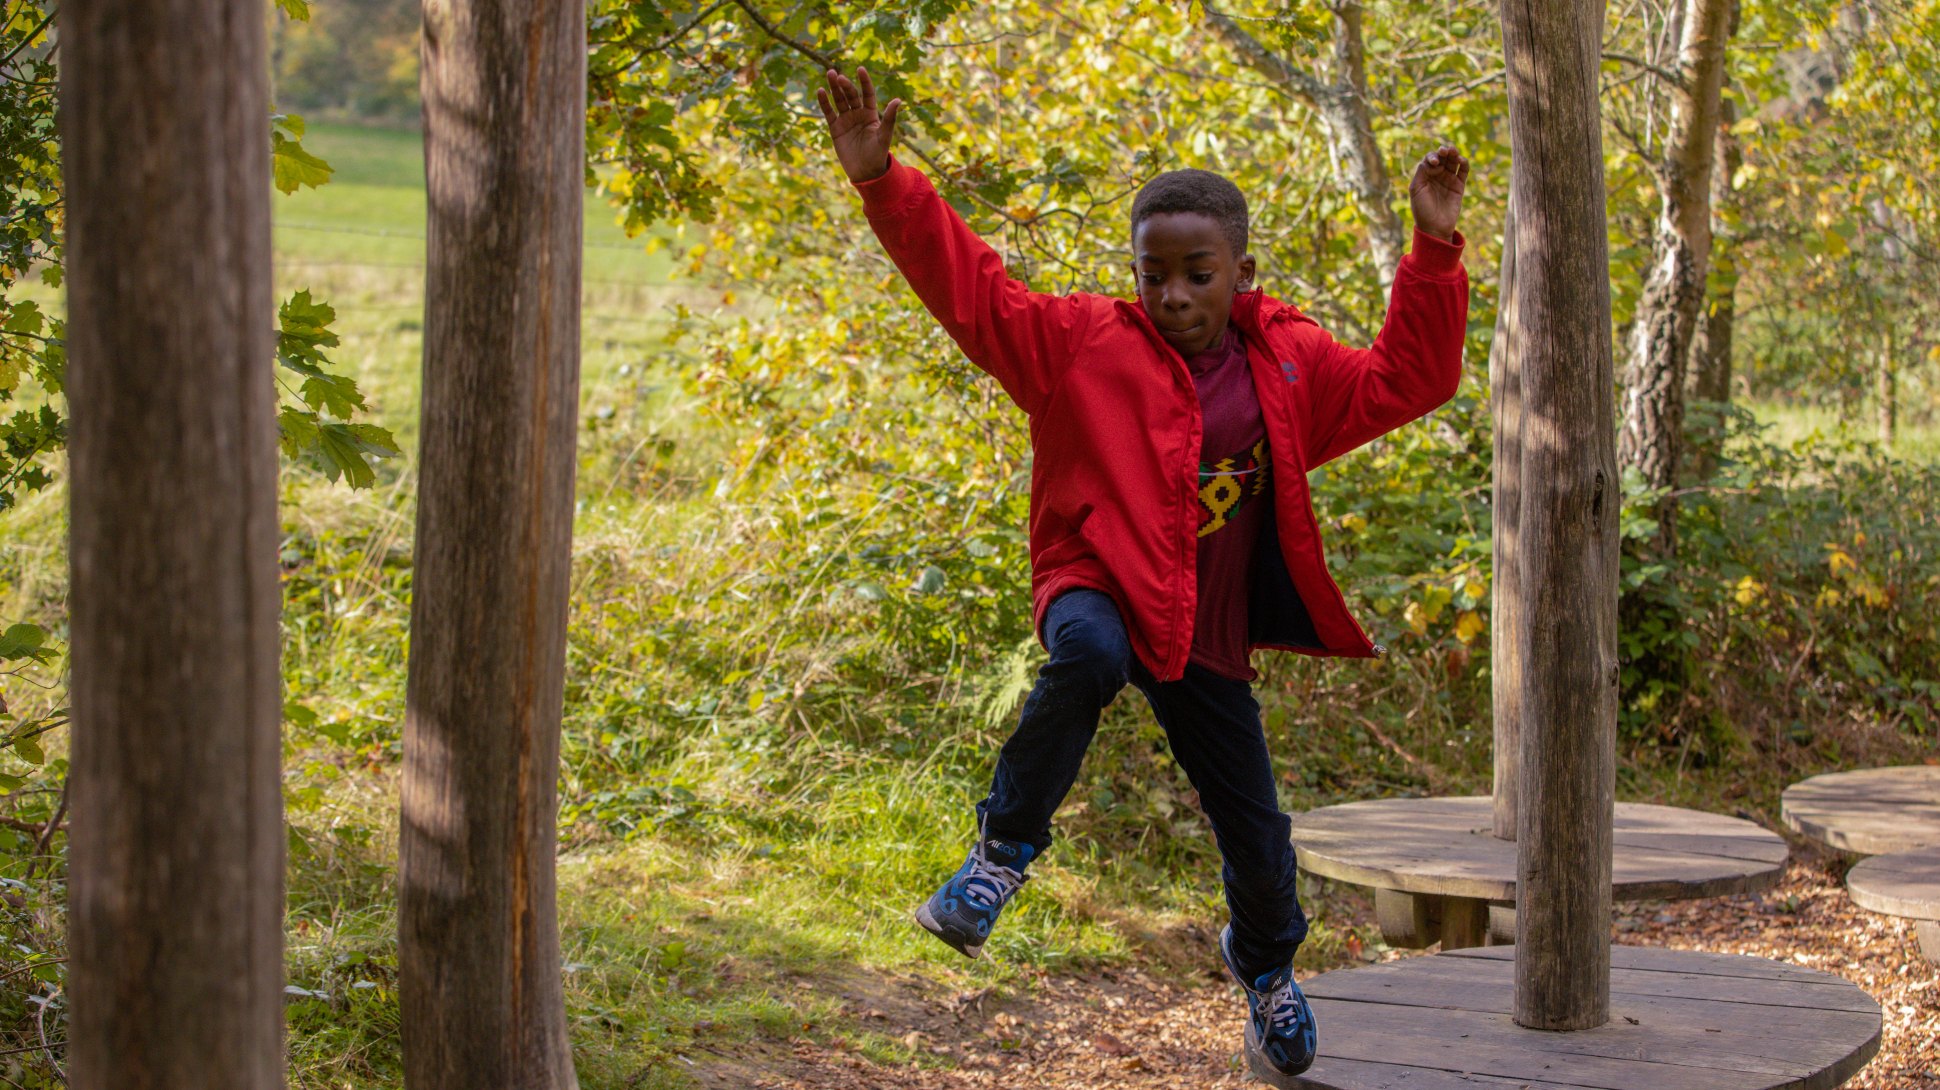 A child in a red coat jumps in a forest